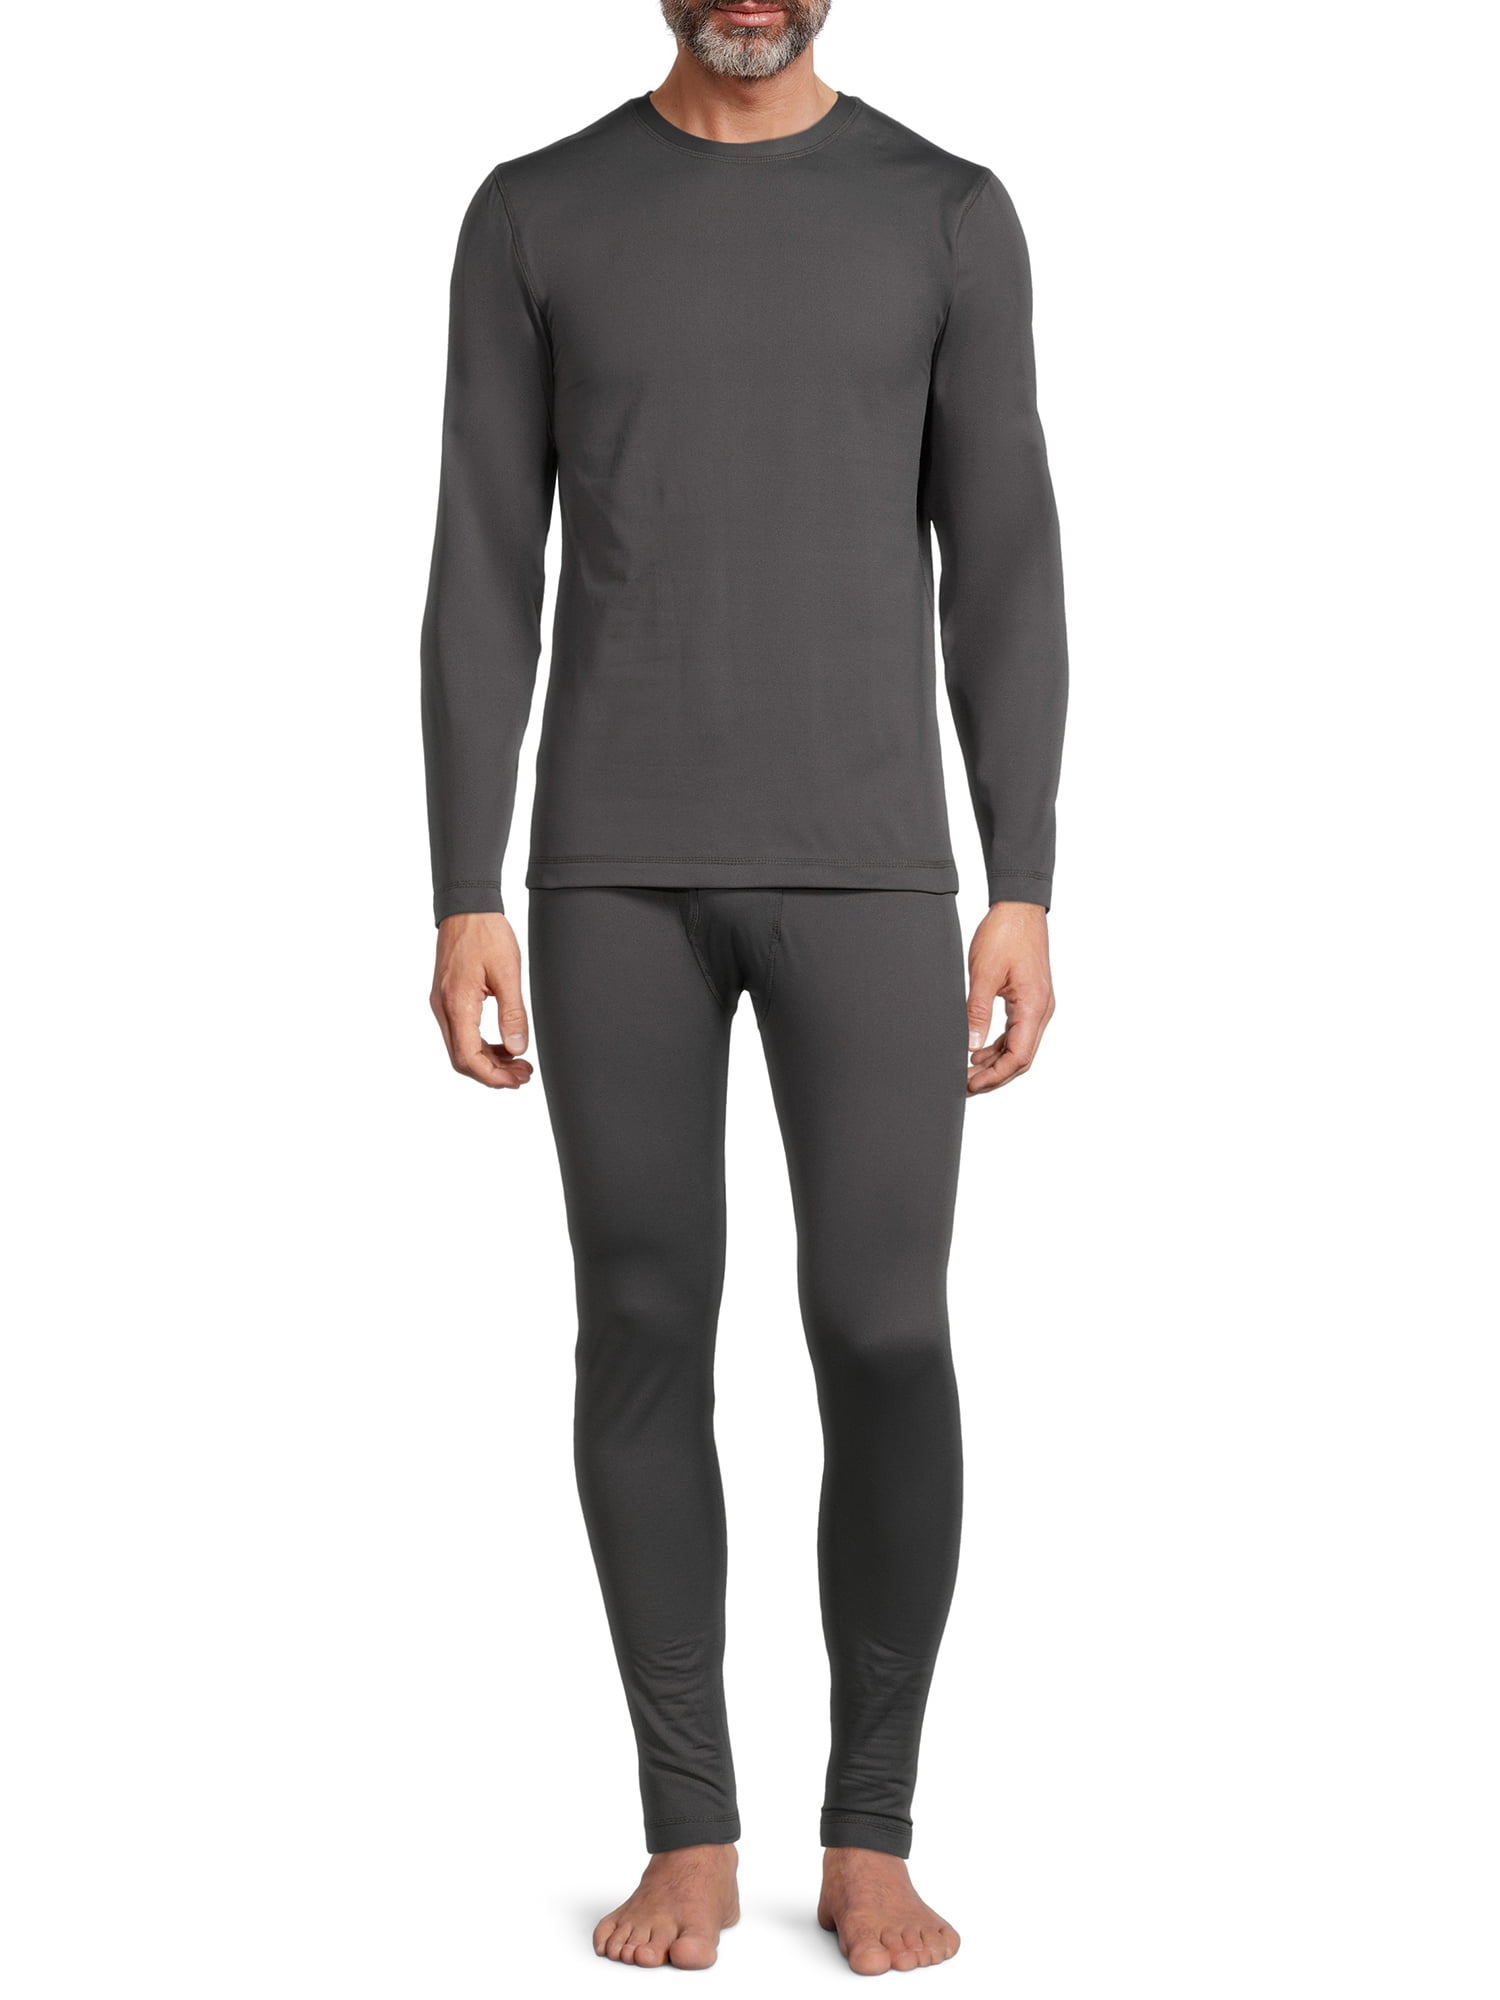 Isotoner Men's Brushed Top and Pants Base Layer Set, 2-Piece